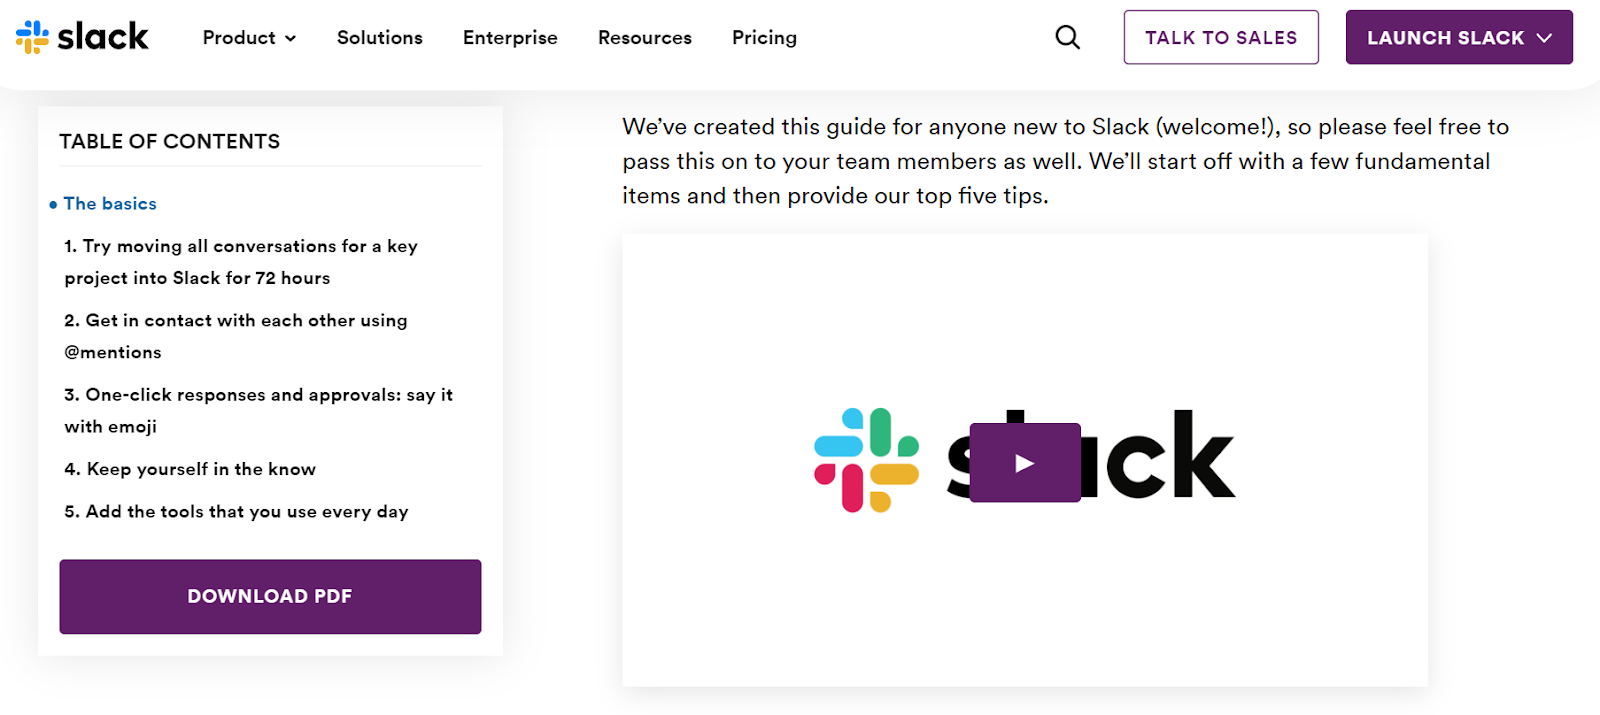 How-to-guides hosted by Slack.